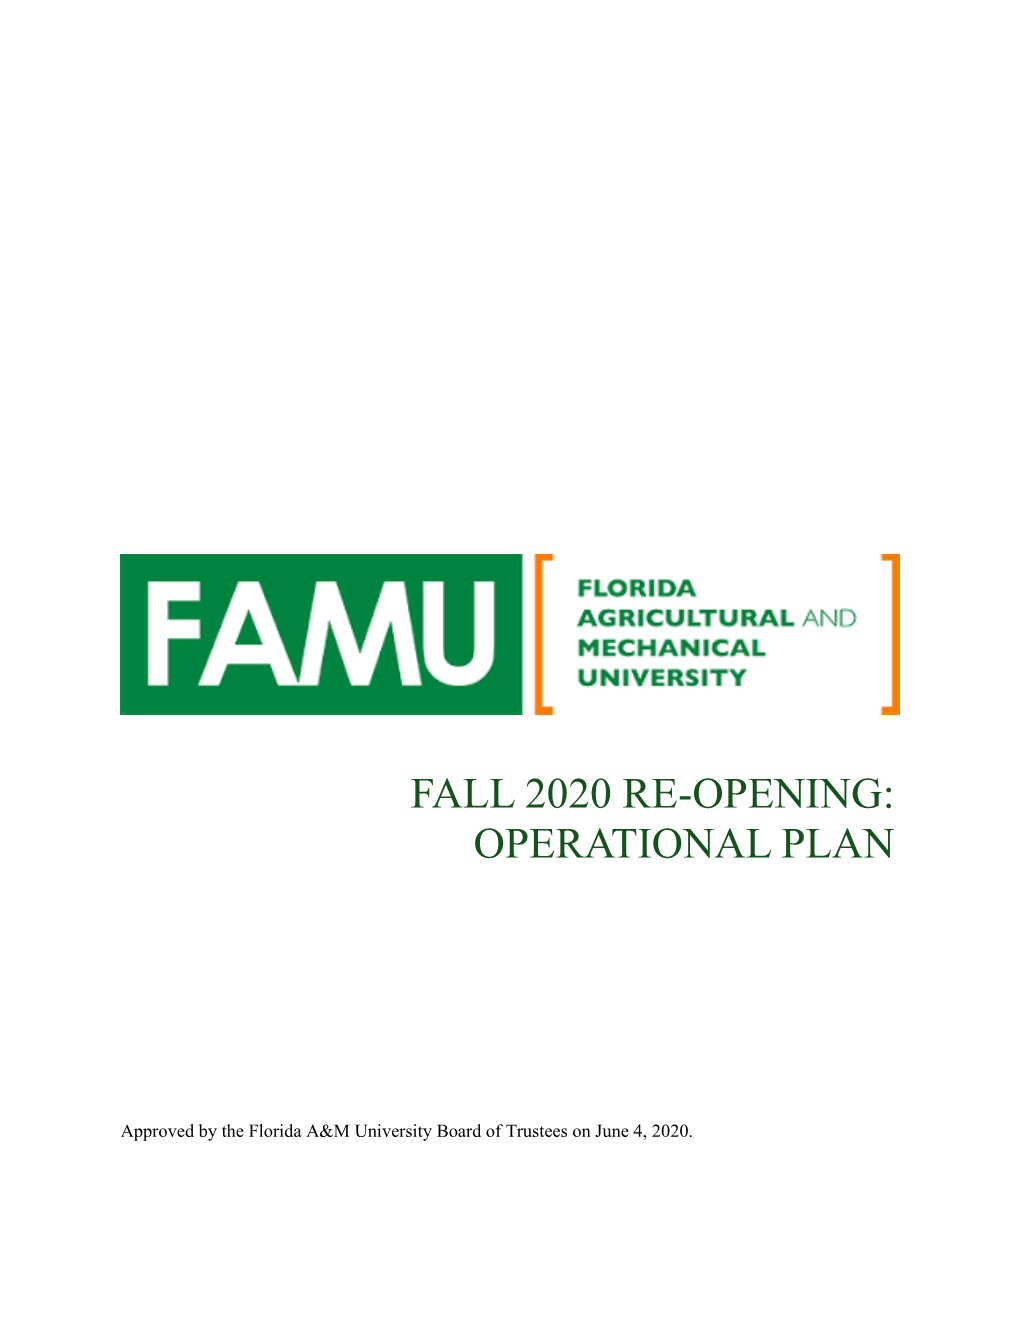 Fall 2020 Re-Opening: Operational Plan